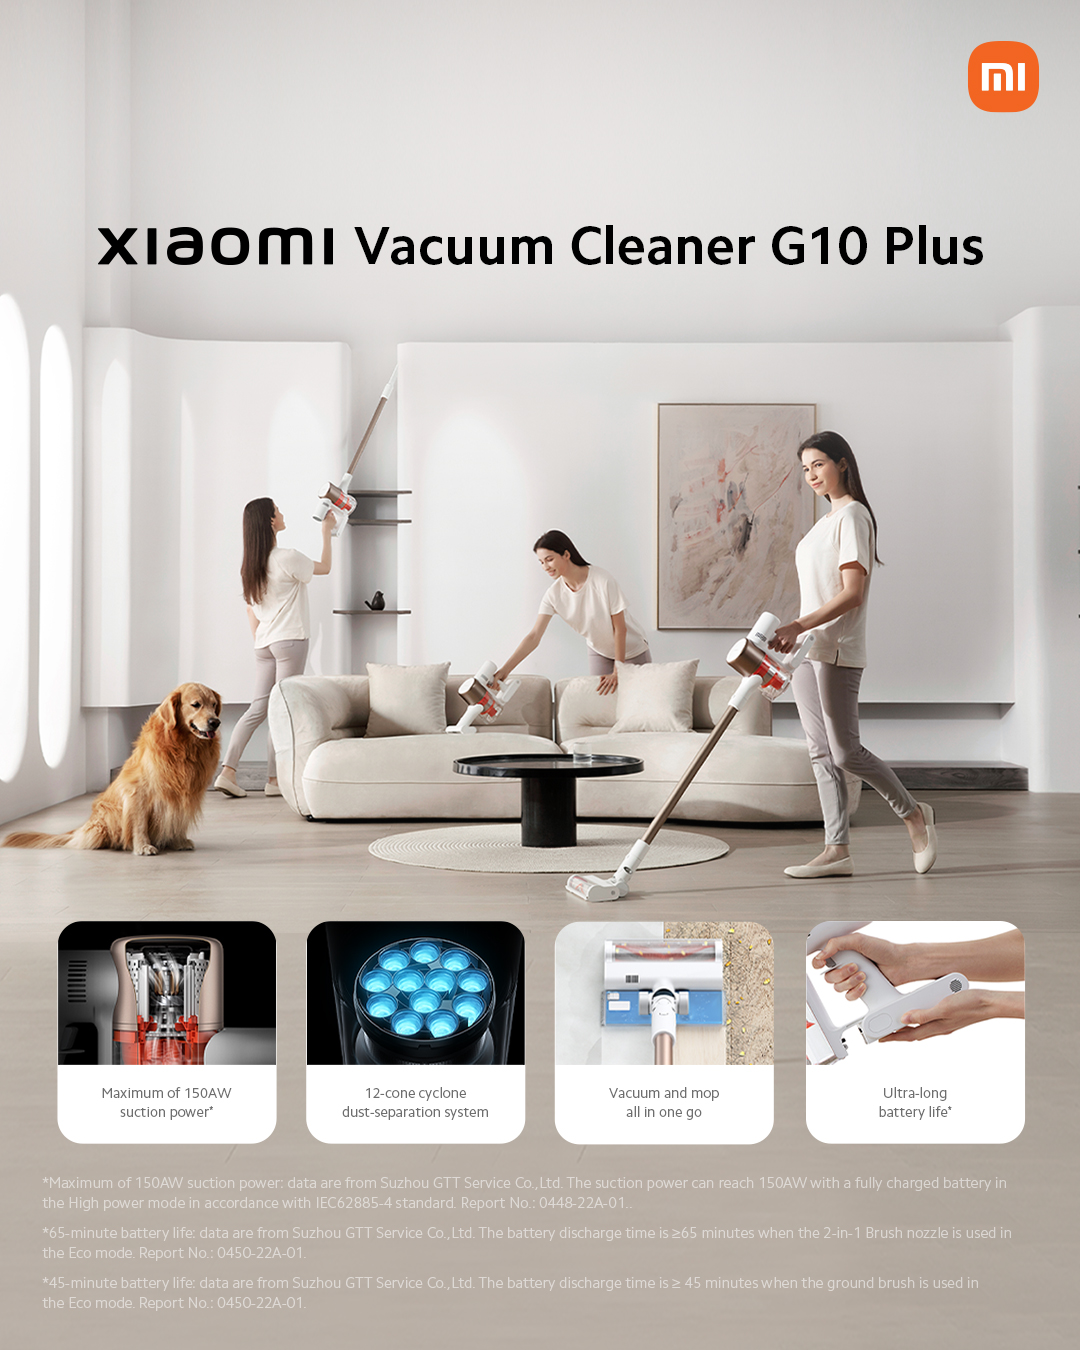 Xiaomi Malaysia on X: The Xiaomi Vacuum Cleaner G10 Plus offers a range of  impressive features that make it a top choice for keeping your home clean!  ✨ Buy now- Lazada